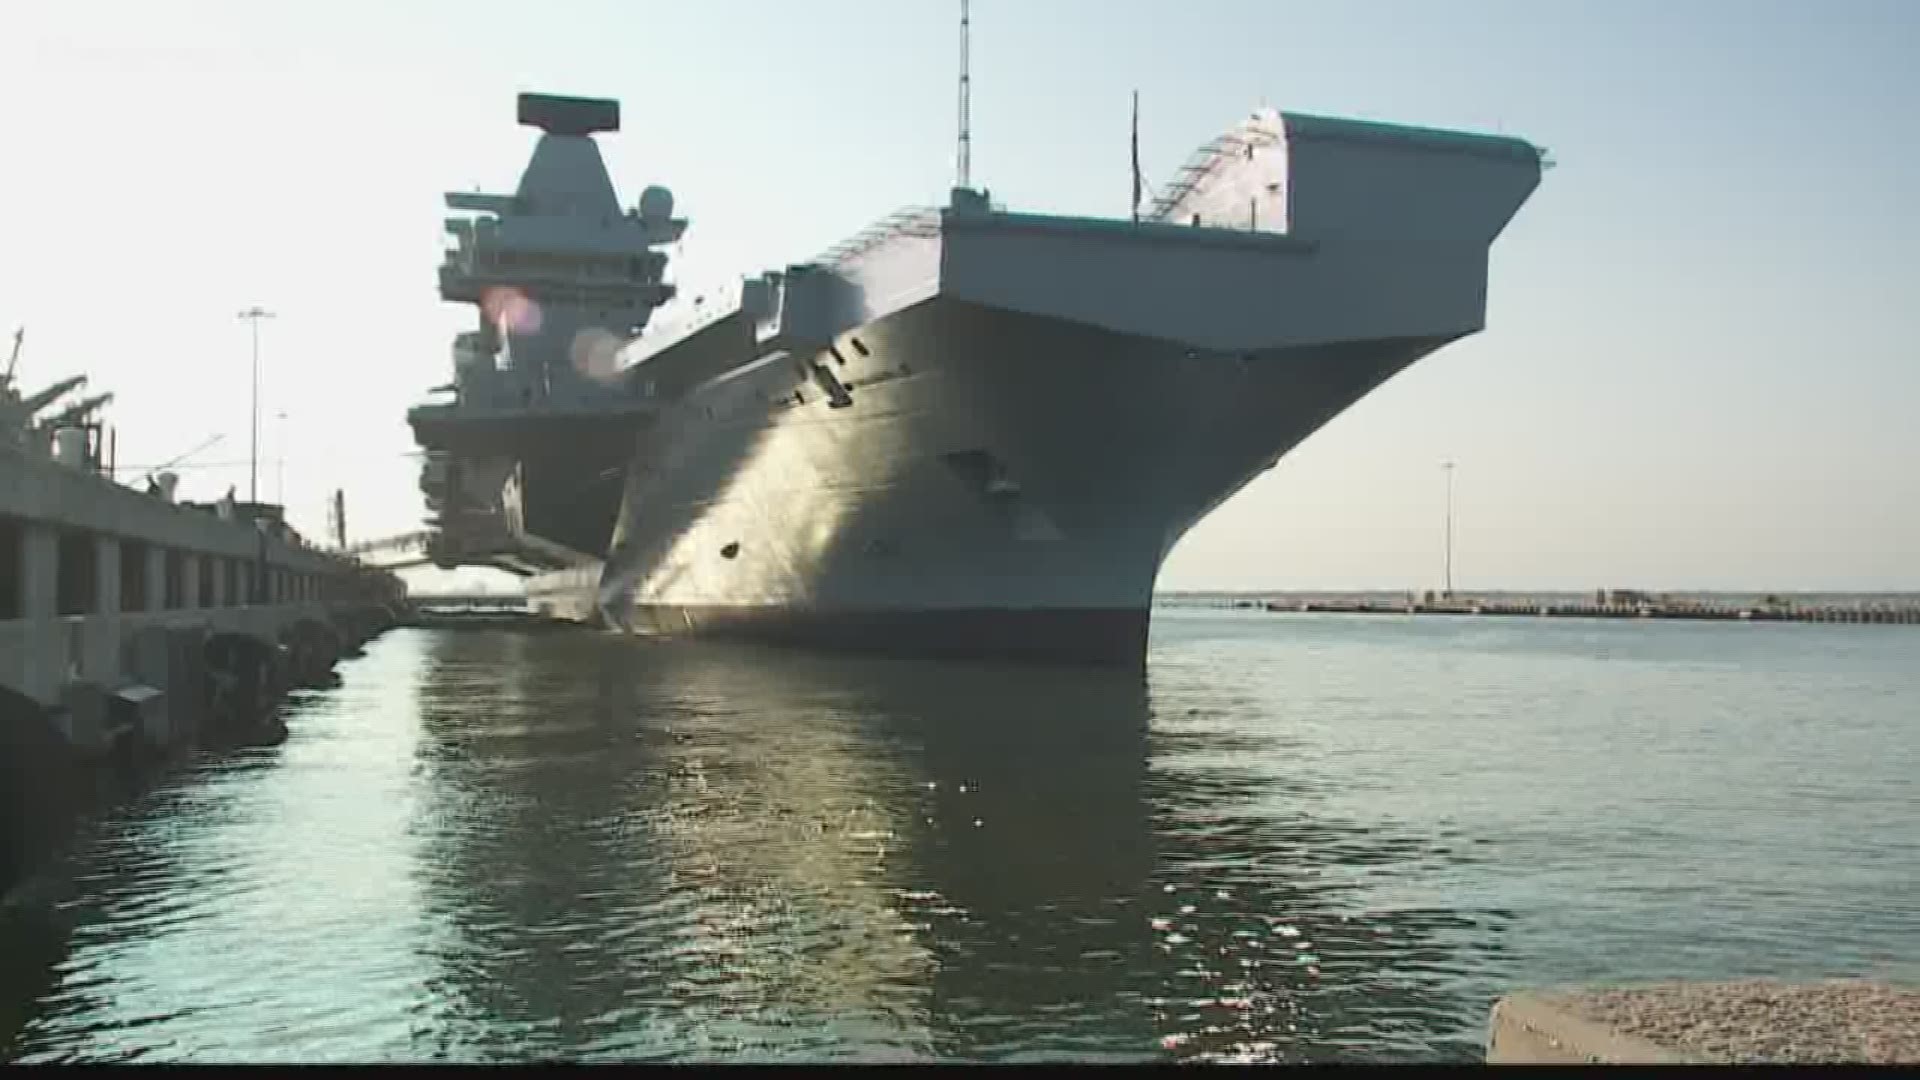 The Royal Navy is in town this weekend, their newest, largest ship, the HMS Queen Elizabeth, is currently docked in Norfolk.